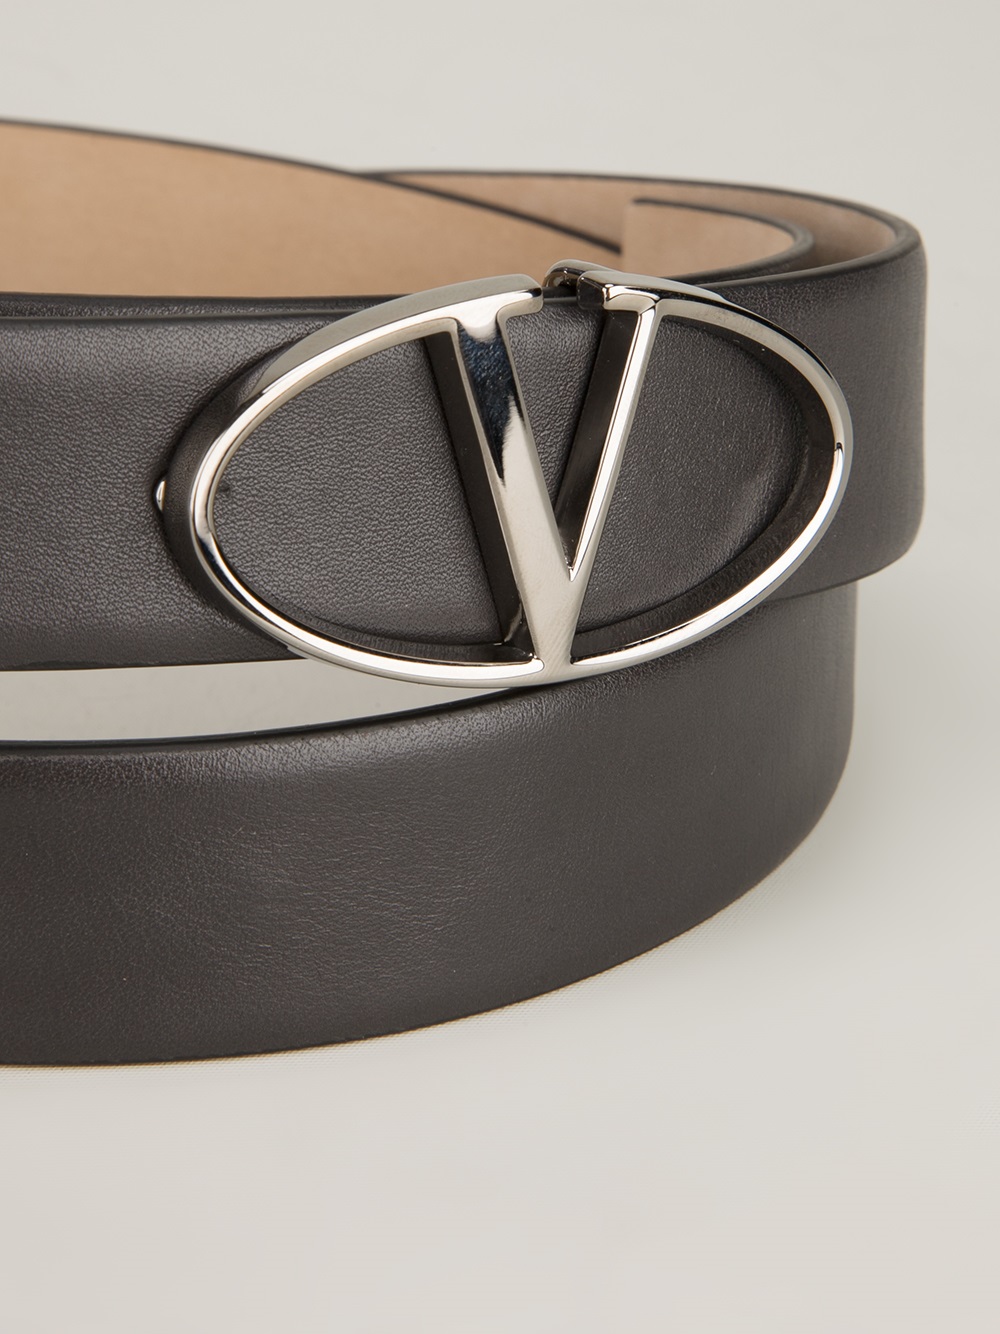 Valentino Leather Belt in Grey (Gray) for Men - Lyst